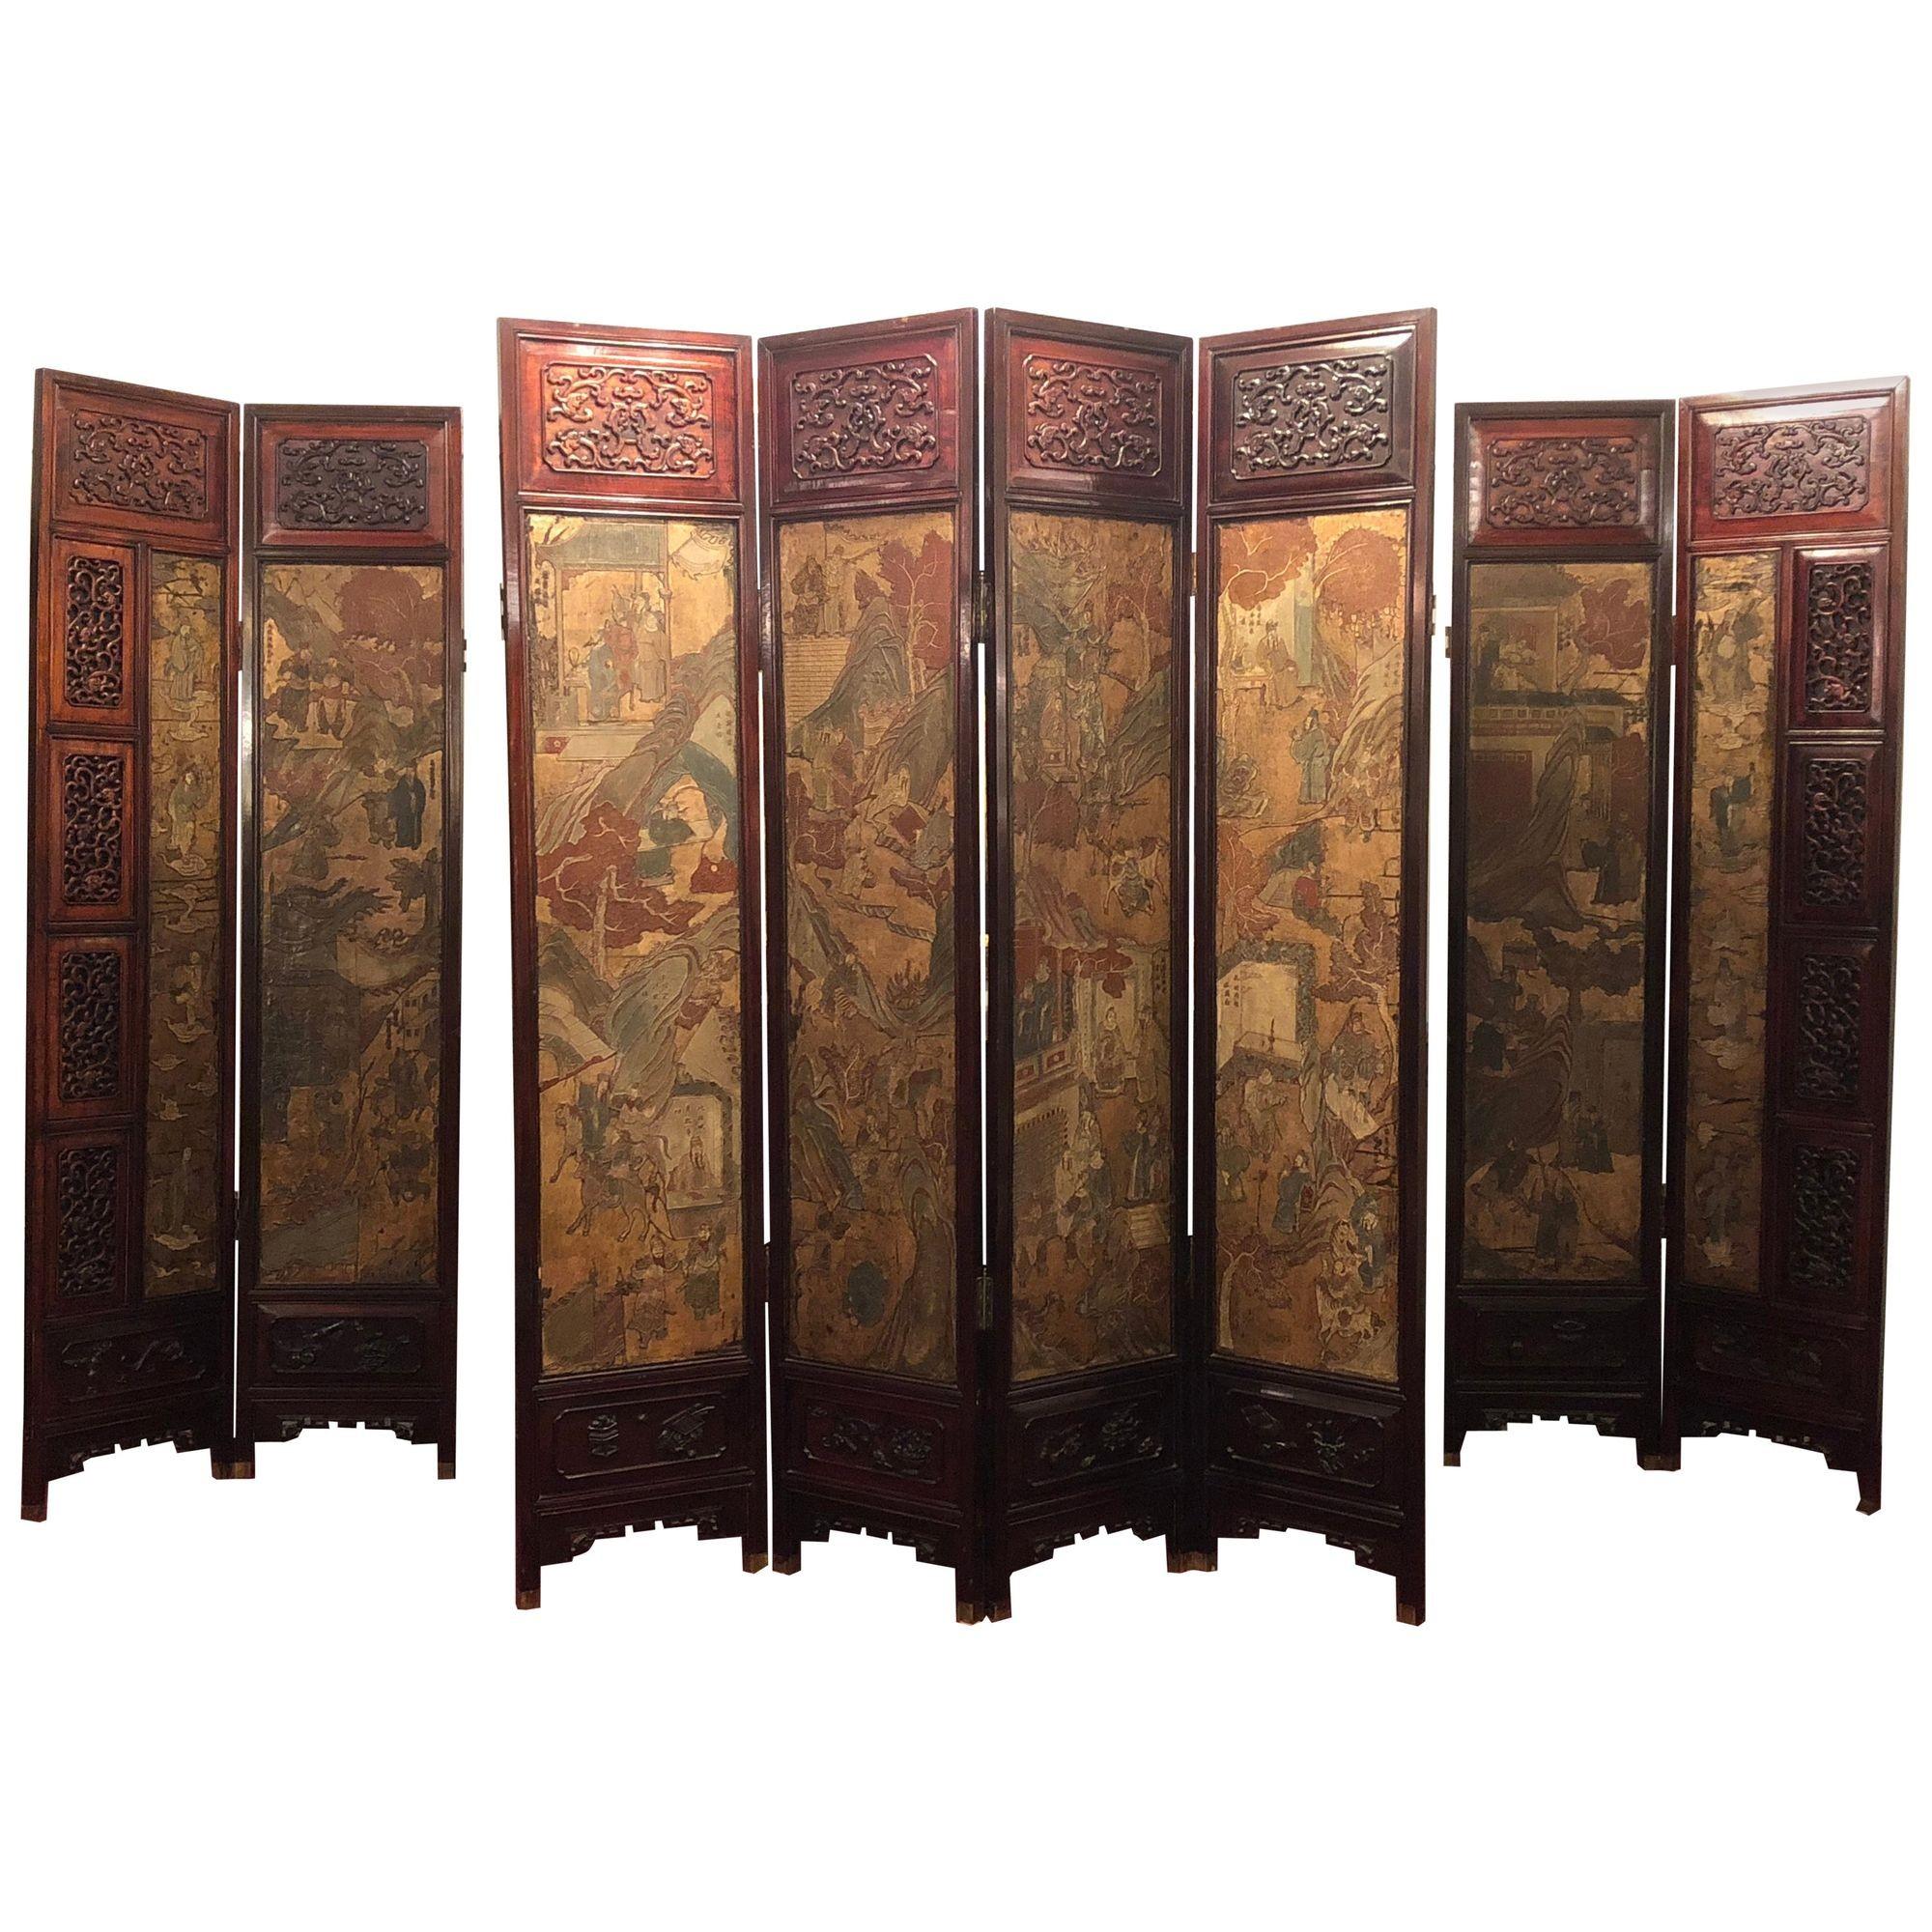 Chinese Coromandel Screen, 18th Century, Rosewood, 8 Panel, Painted, Figural, Depicting Flying Geese

One of a kind. Chinese Coromandel screen from the late 1700s with a fabulous rosewood carved frame from the mid to late 1800s. The subject matter